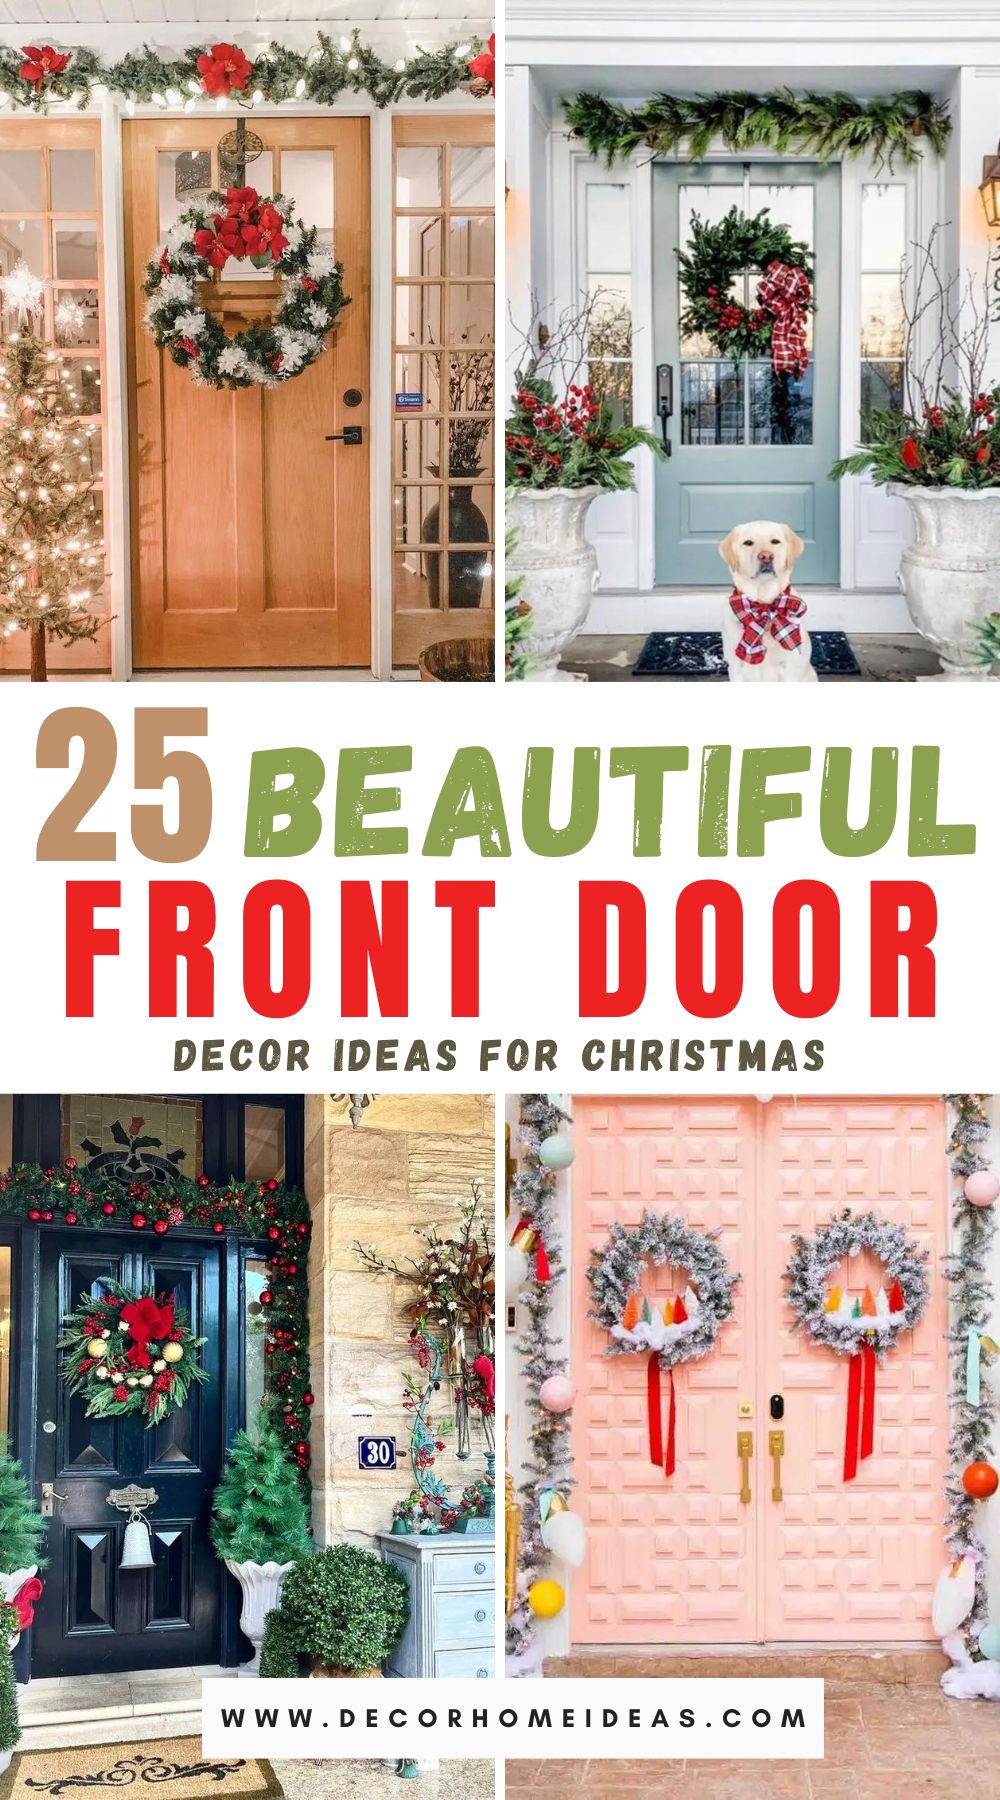 Uncover 25 captivating Christmas front door decor ideas to create a warm and inviting entrance for the holiday season. From festive wreaths to twinkling lights, discover inspiration to adorn your front door with seasonal splendor and charm.